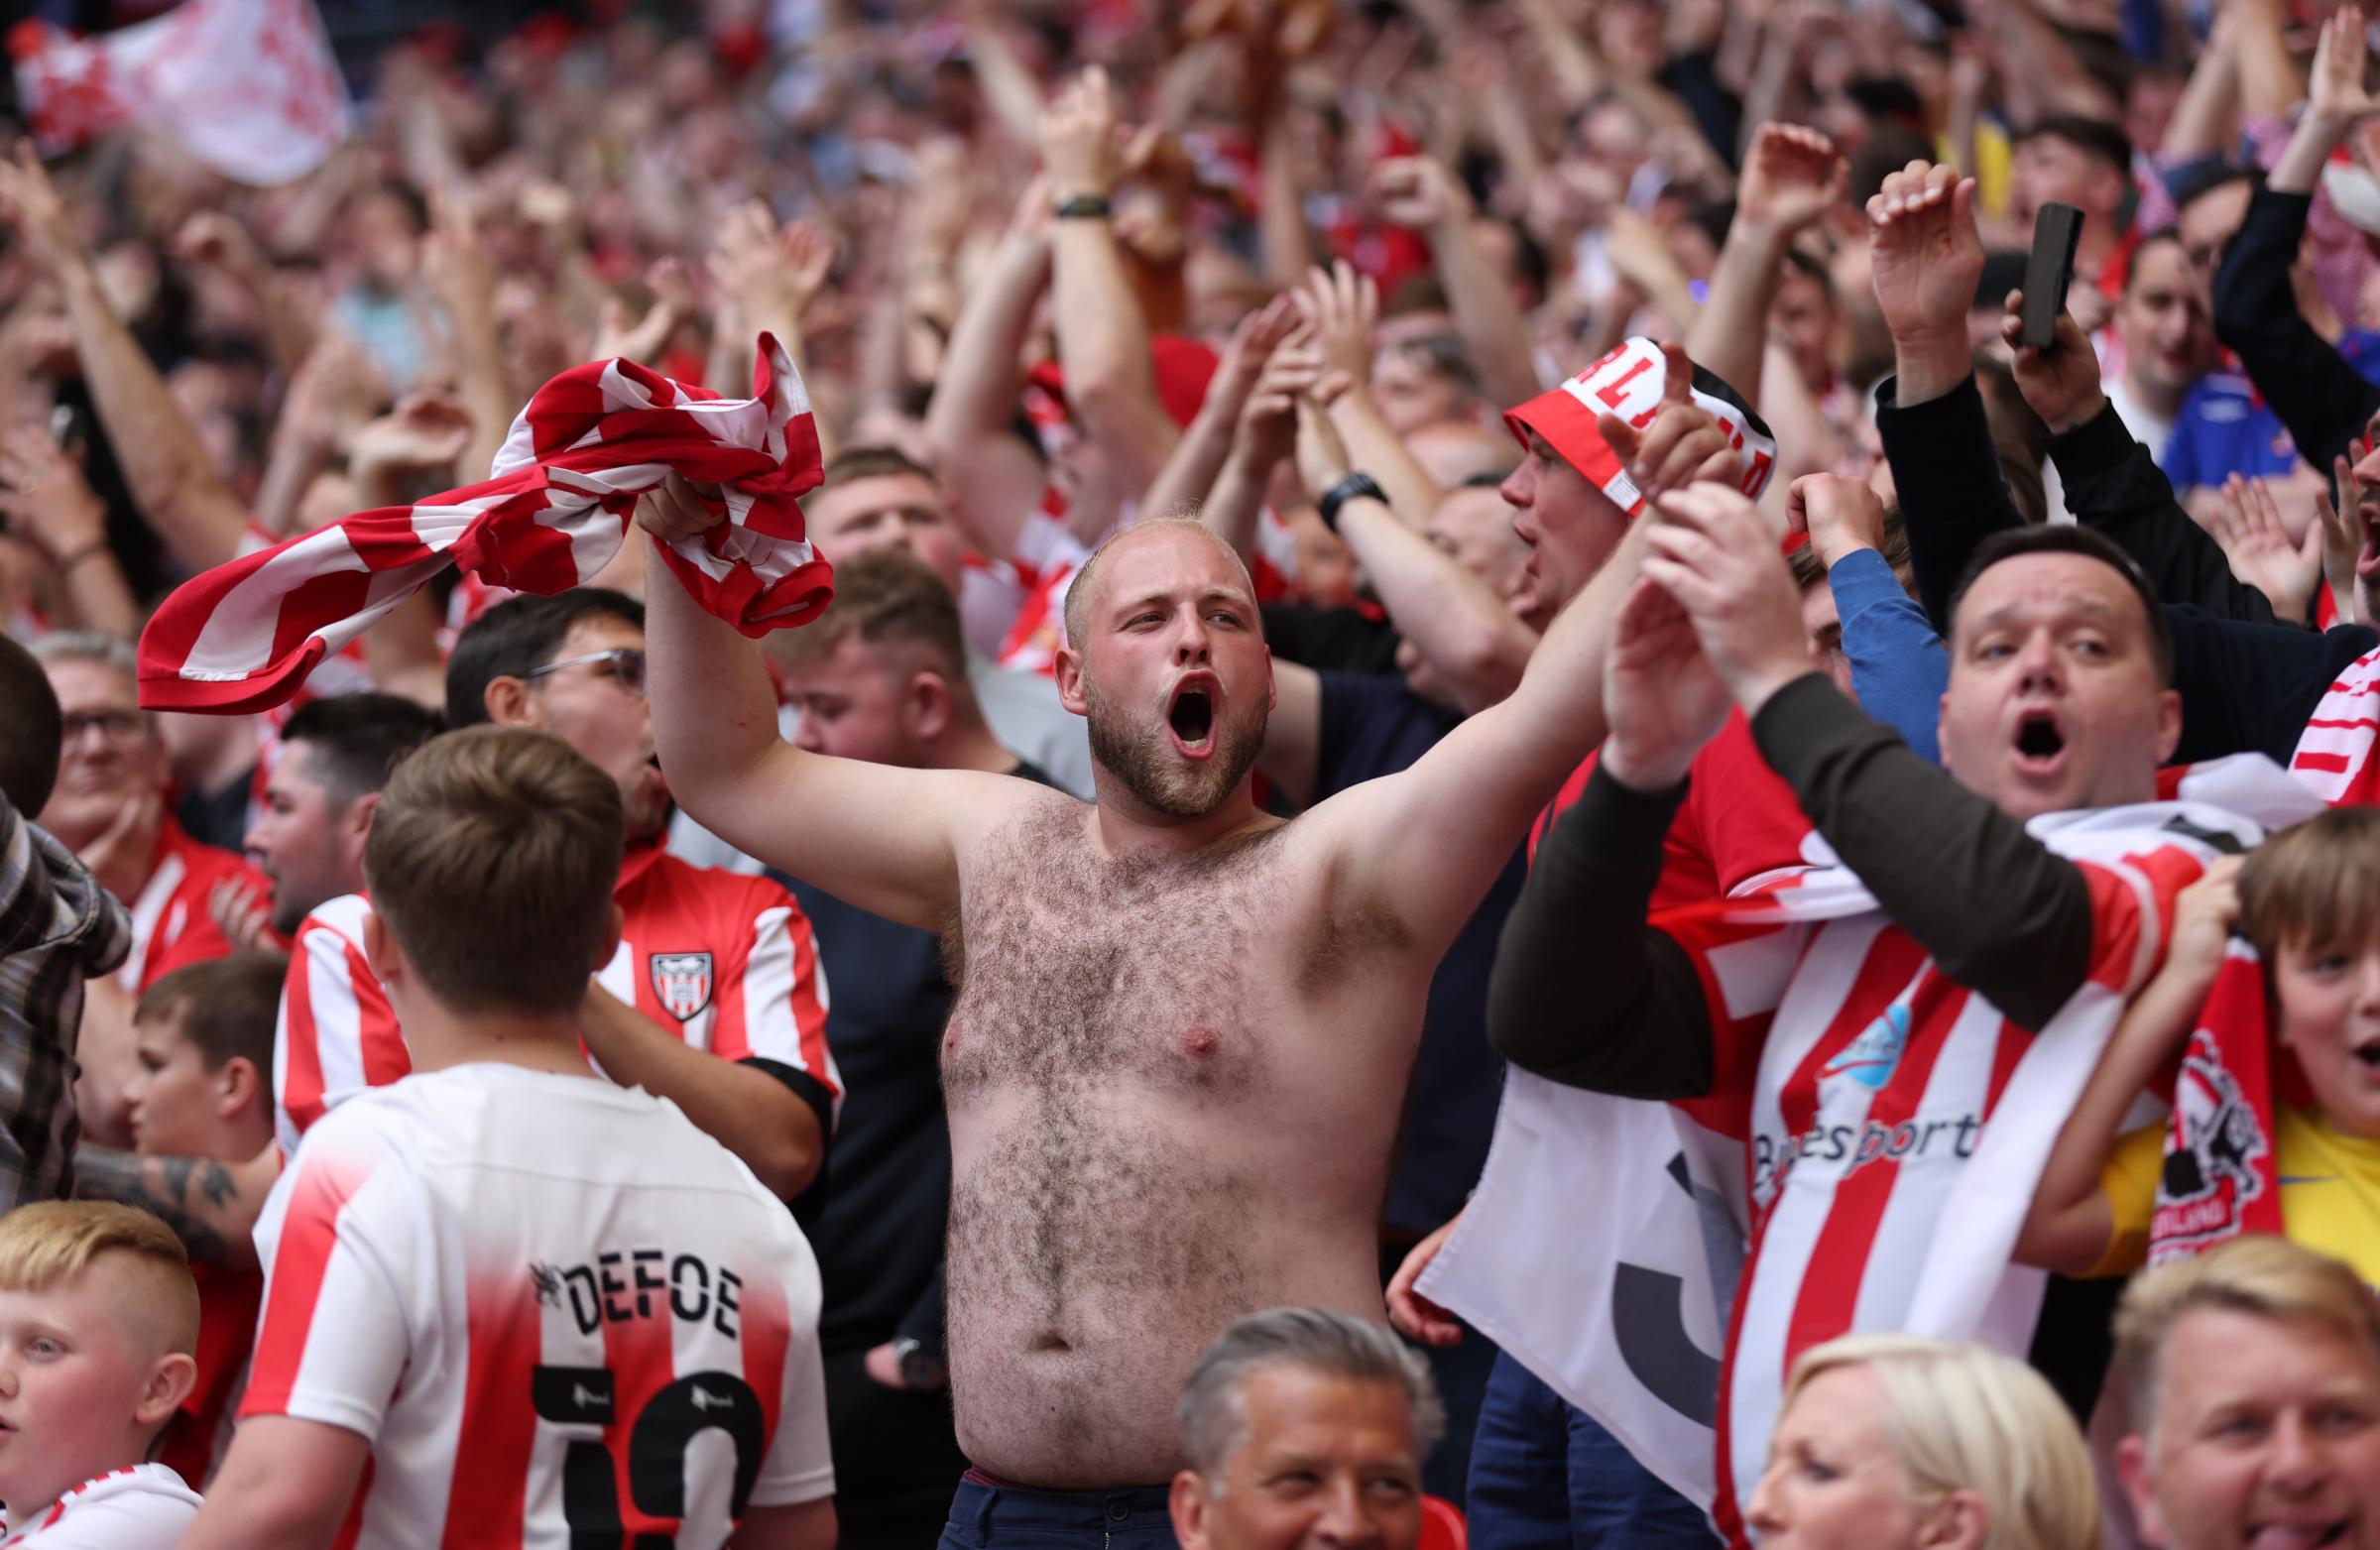 Sunderland think attendance could be 45,000 against Watford